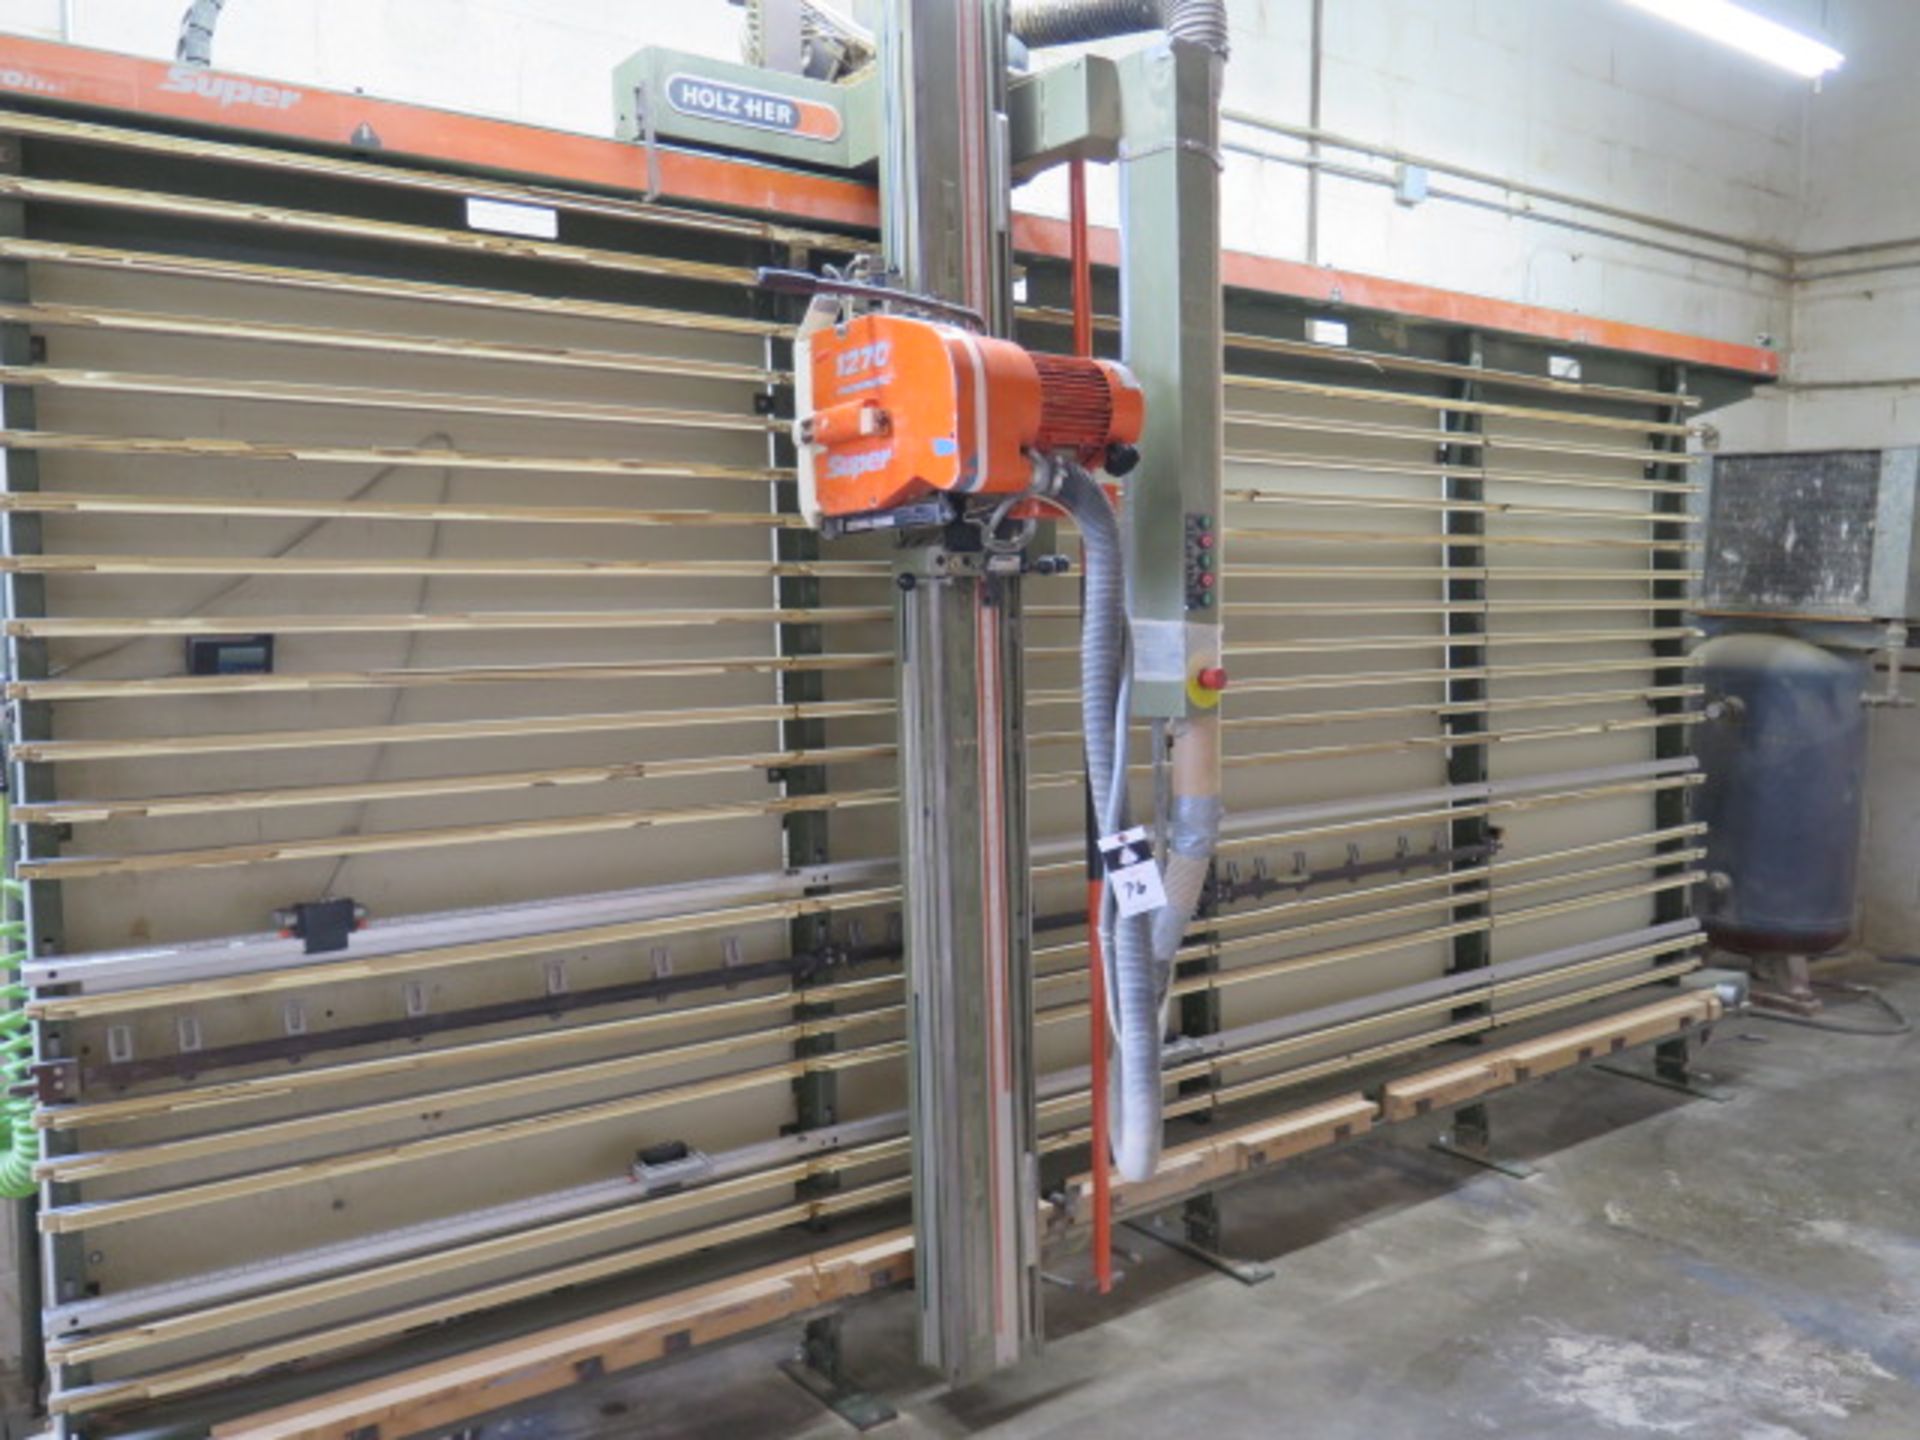 Holz-Her “Super 1270 Automatic” 10’ Vertical Panel Saw s/n 641 (SOLD AS-IS - NO WARRANTY)